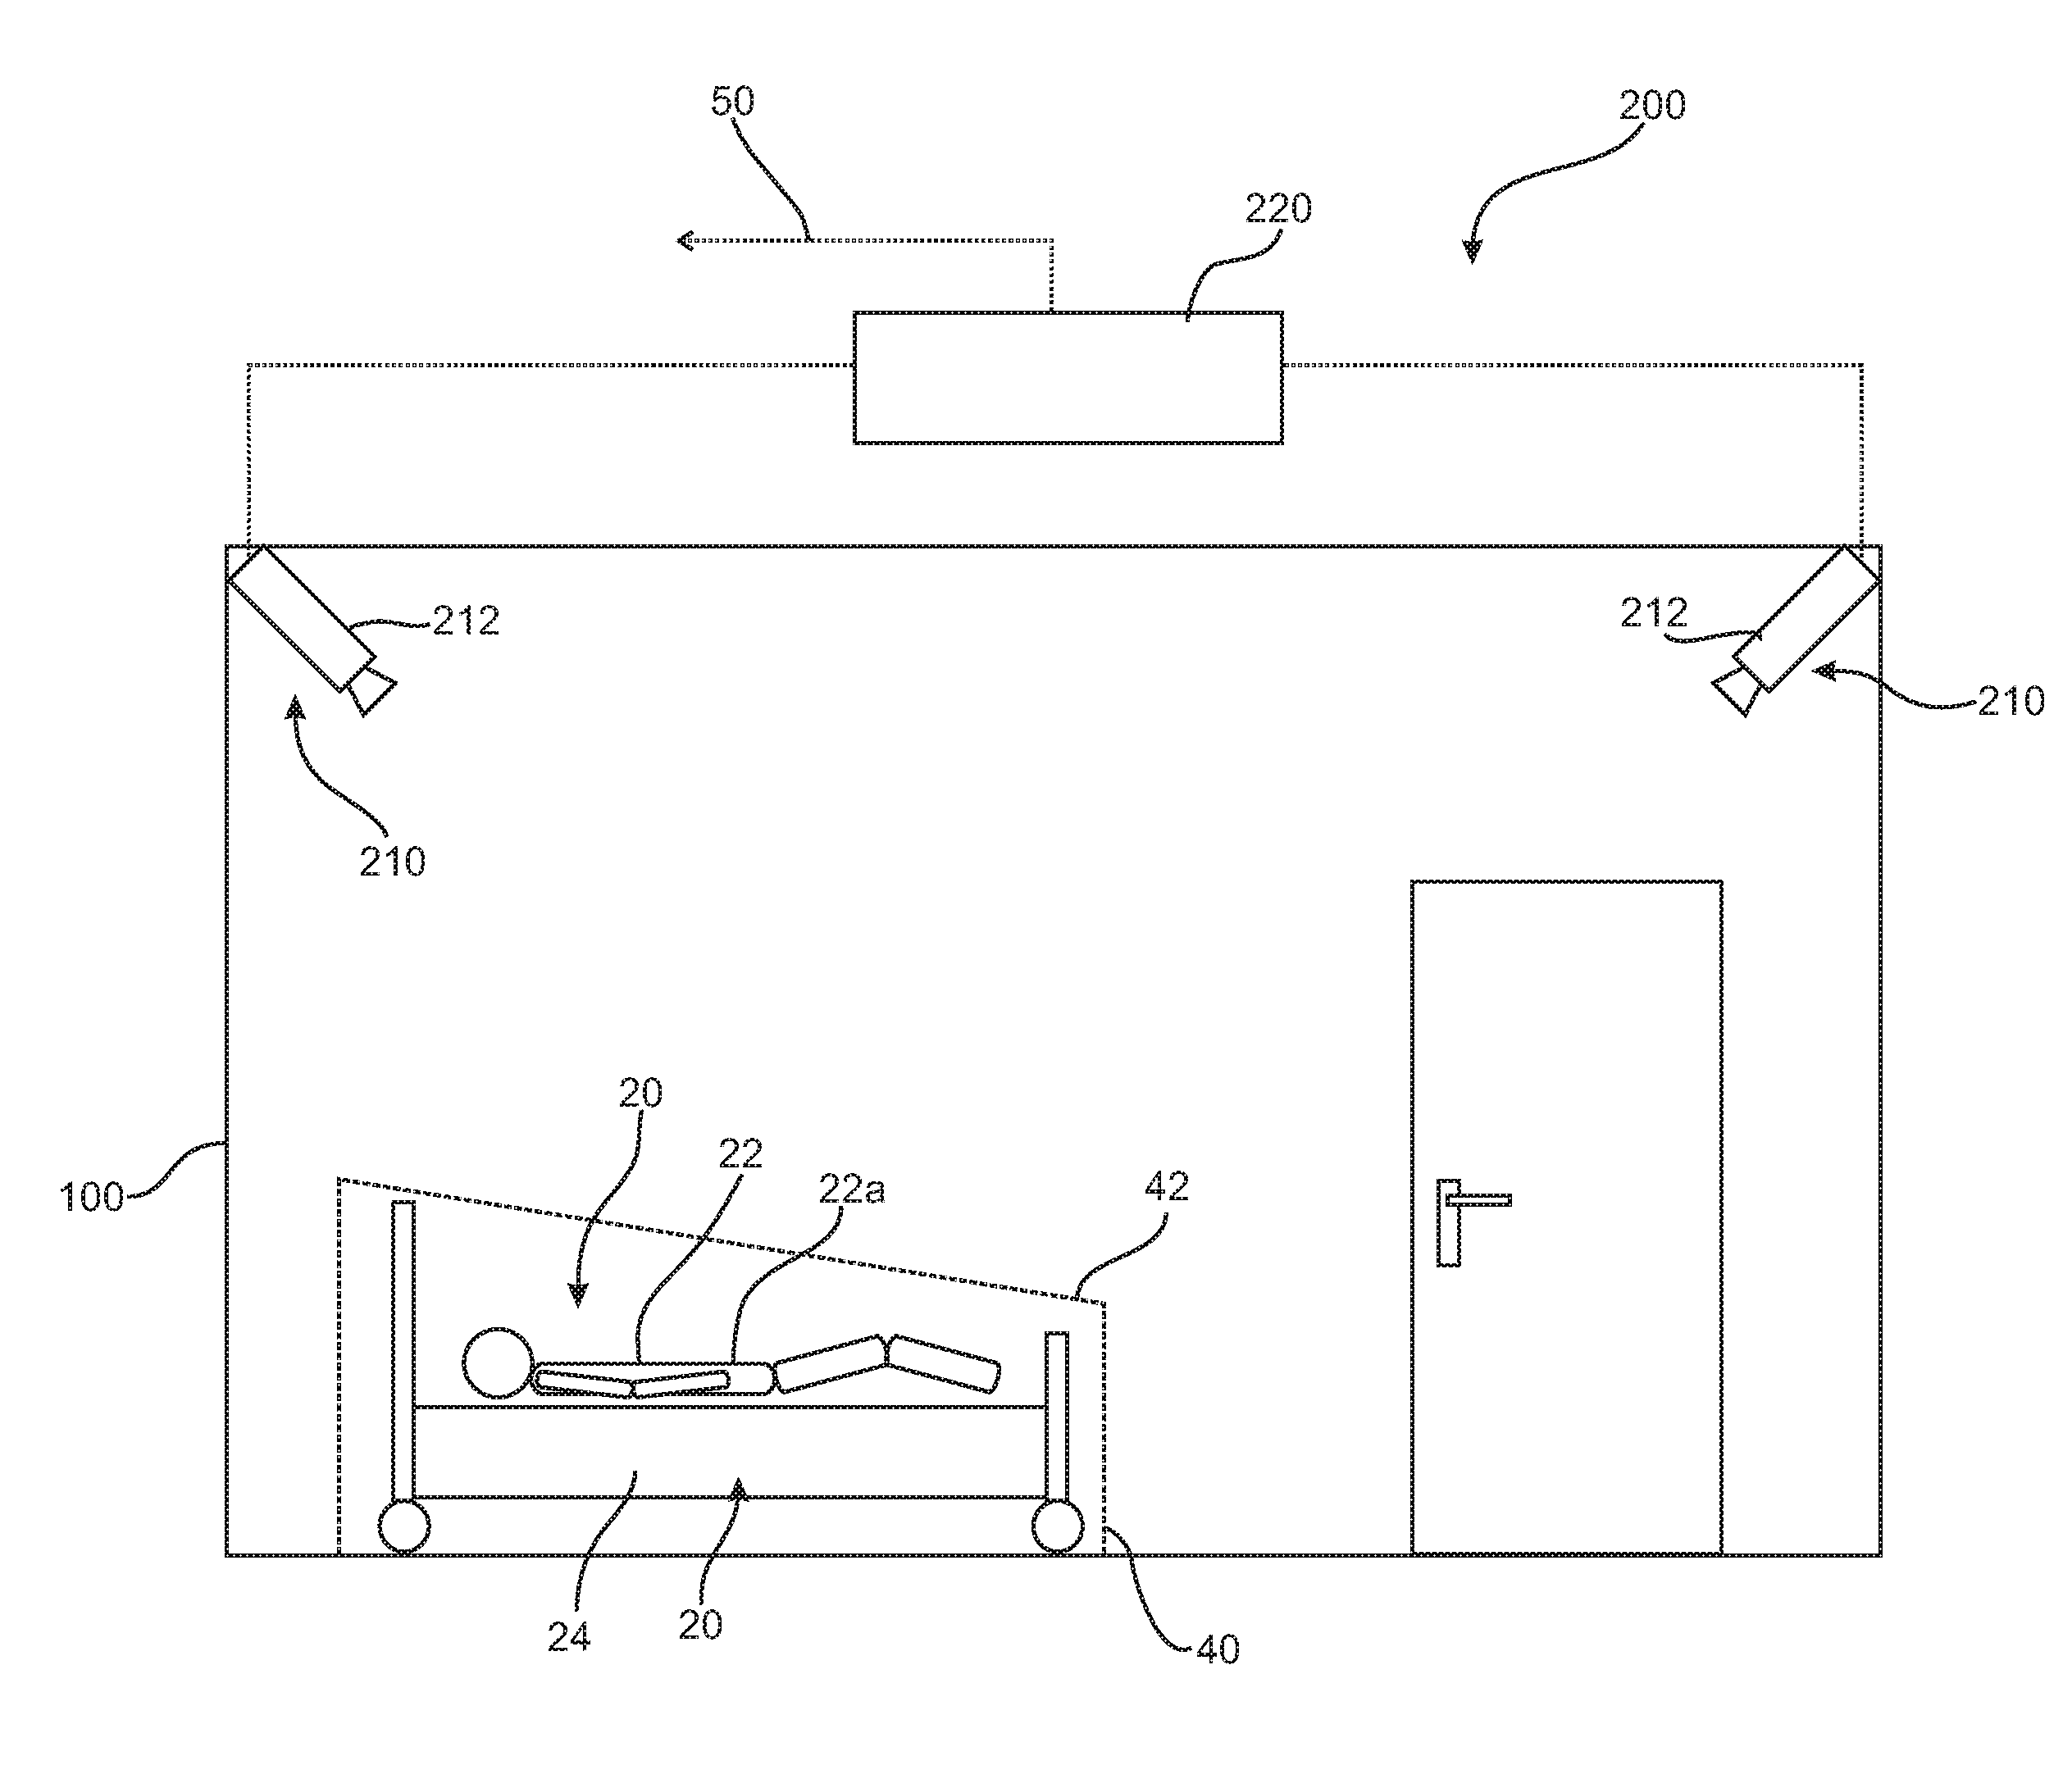 Method for monitoring a patient within a medical monitoring area